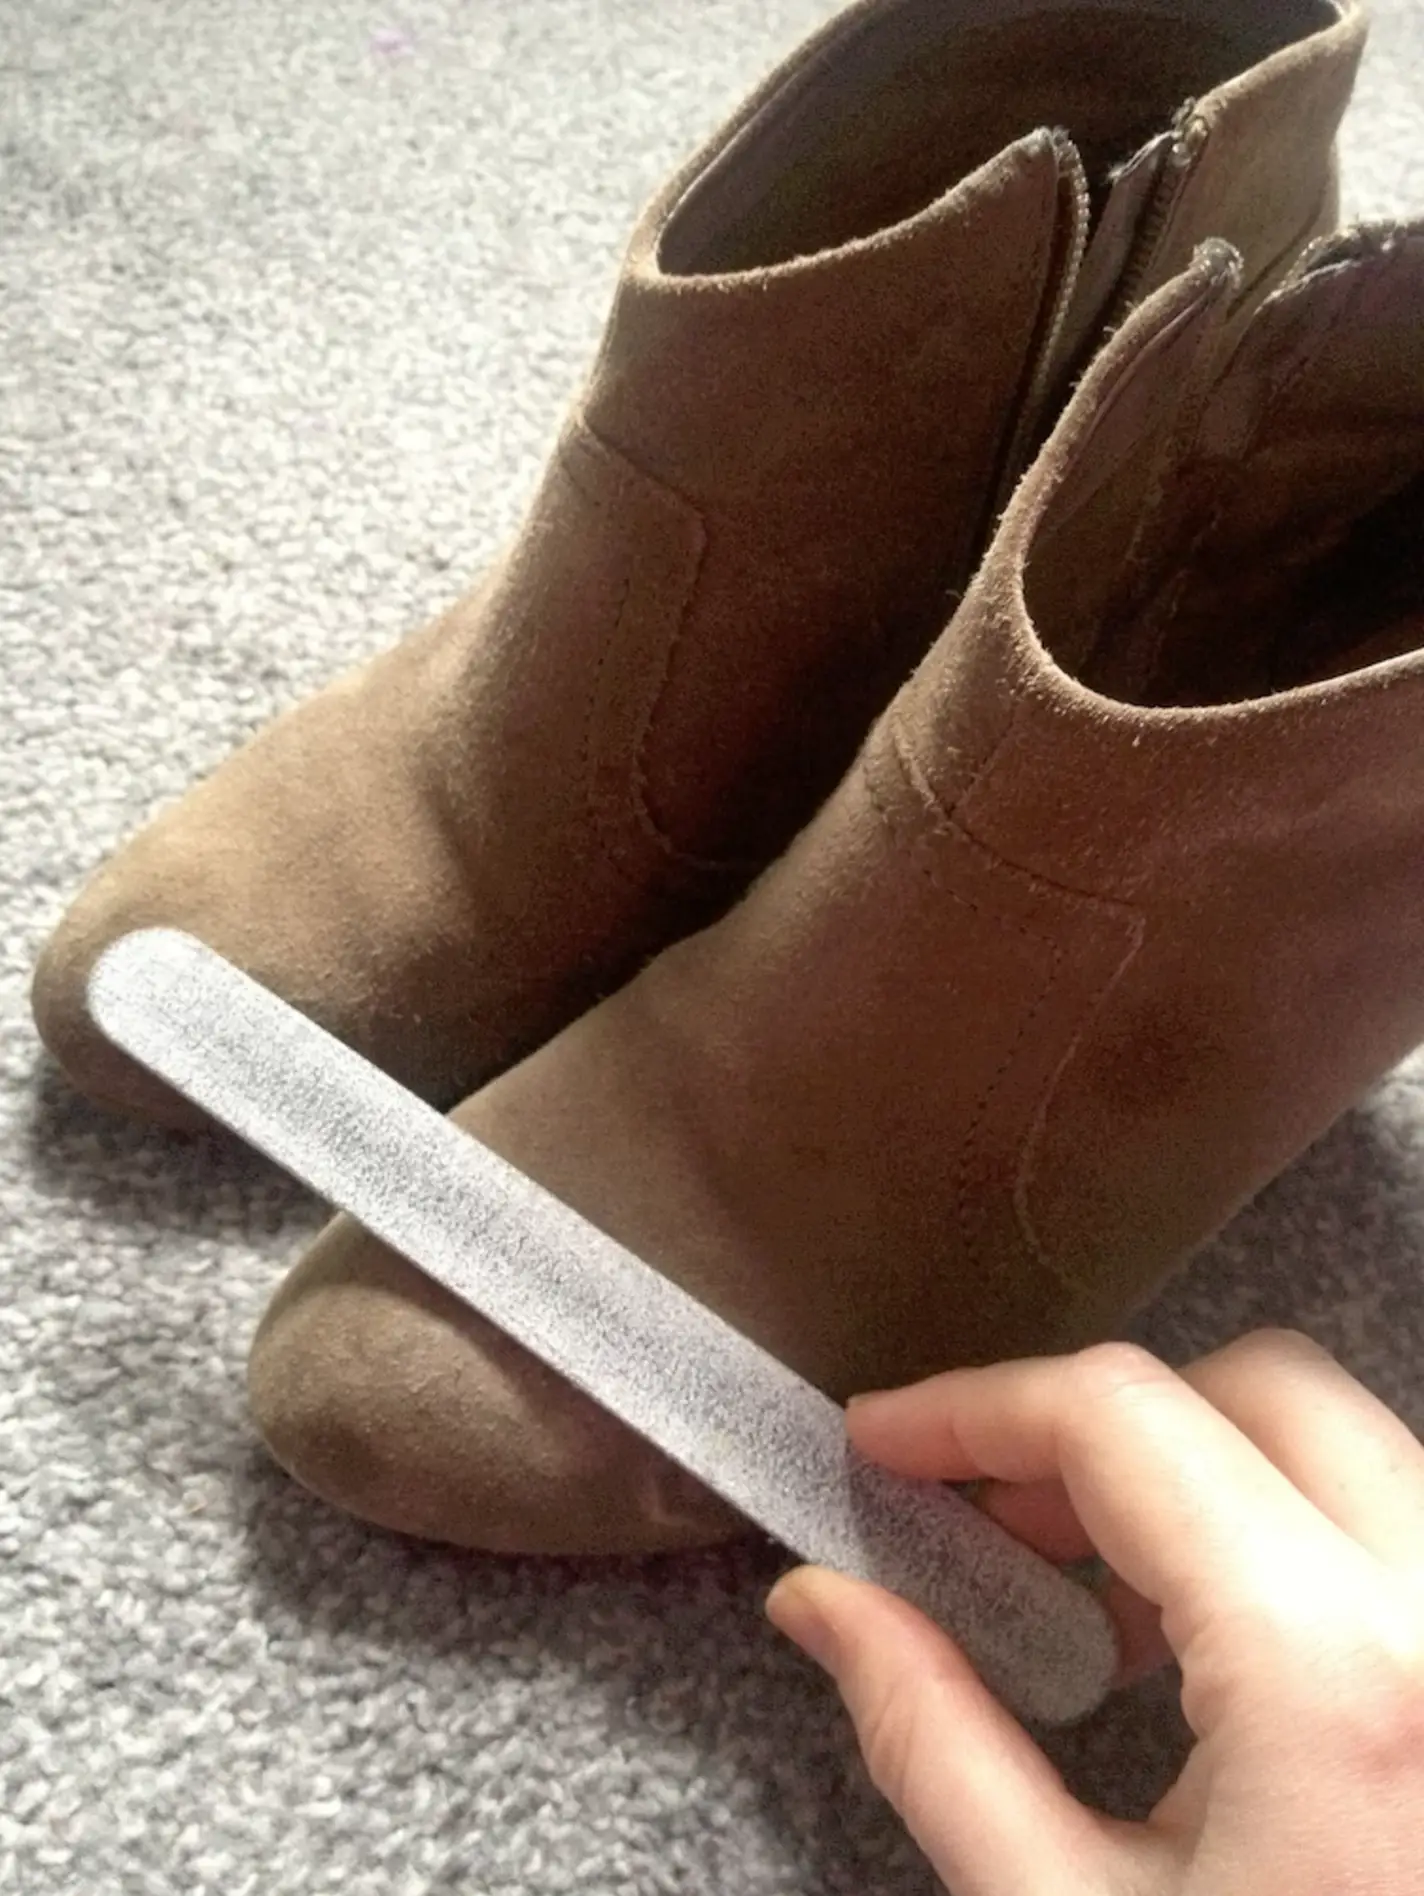 19 Hacks For Fixing Ruined Clothes